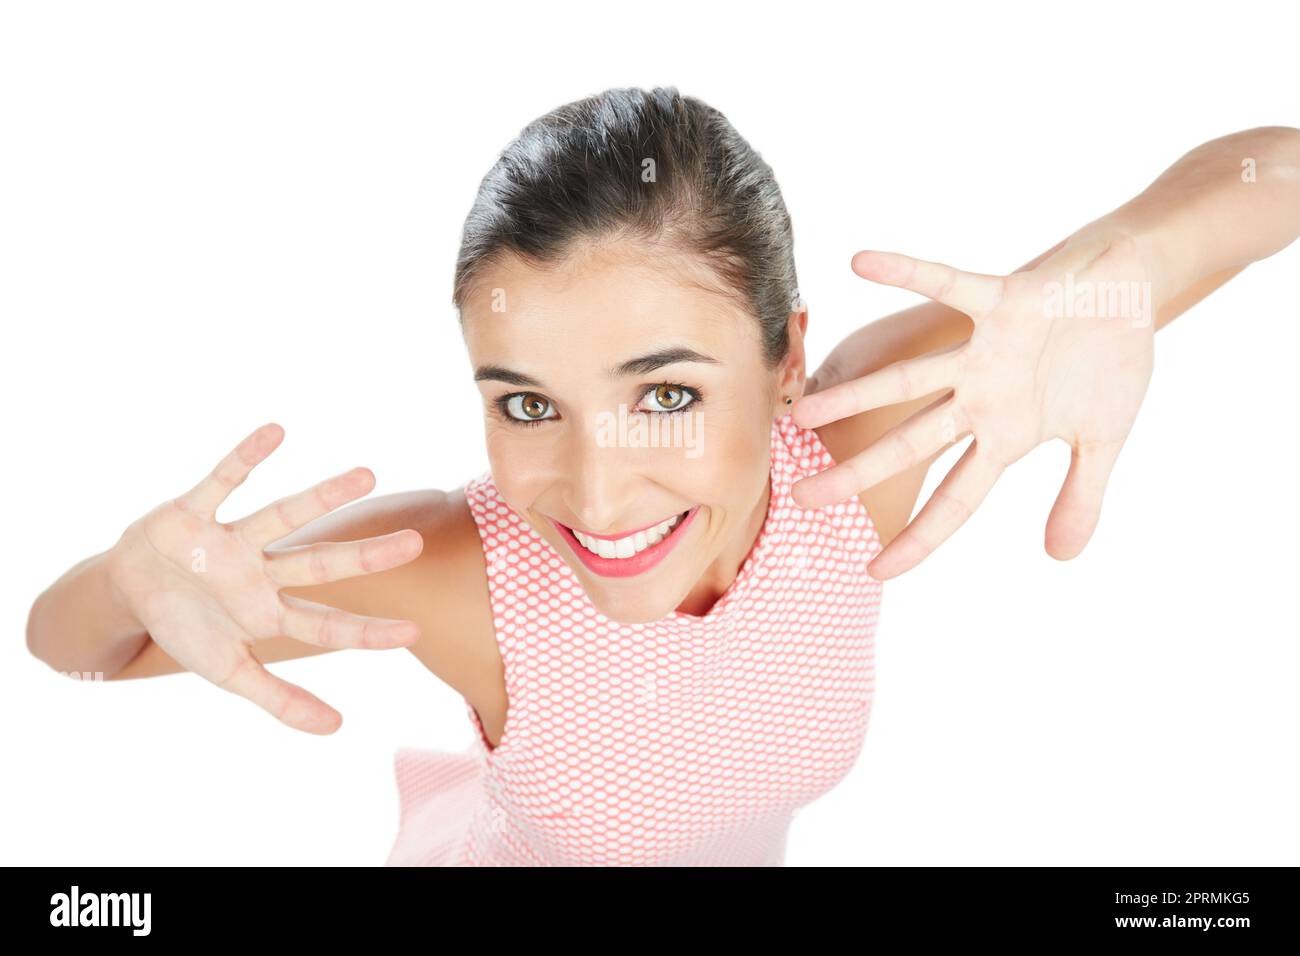 Jazz hands. High angle studio portrait of an attractive young woman posing with her hands in front of her face against a white background. Stock Photo